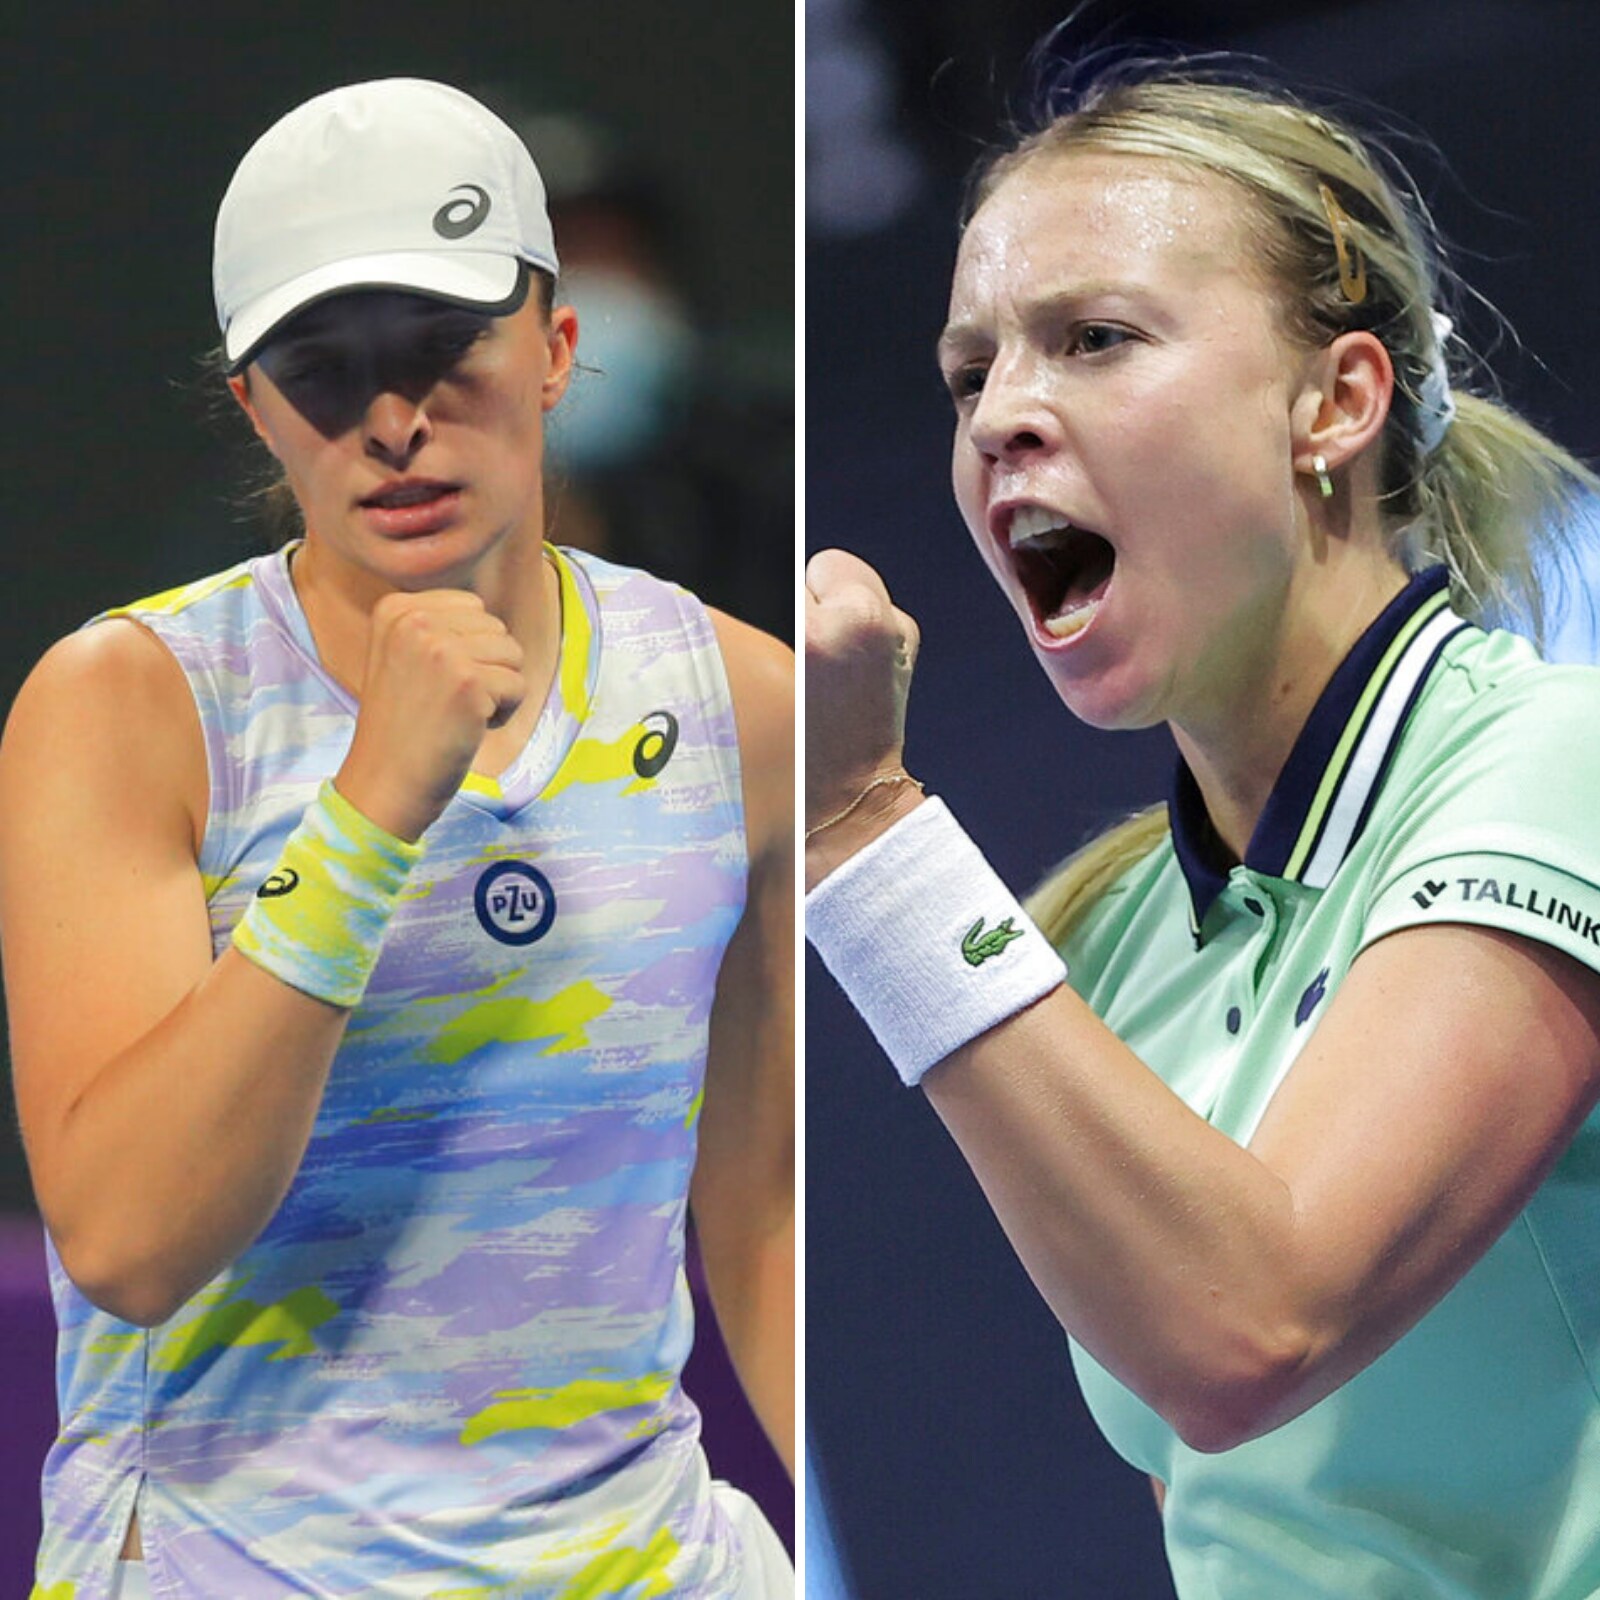 Anett Kontaveit and Iga Swiatek to Meet in Final for Qatar Open Title